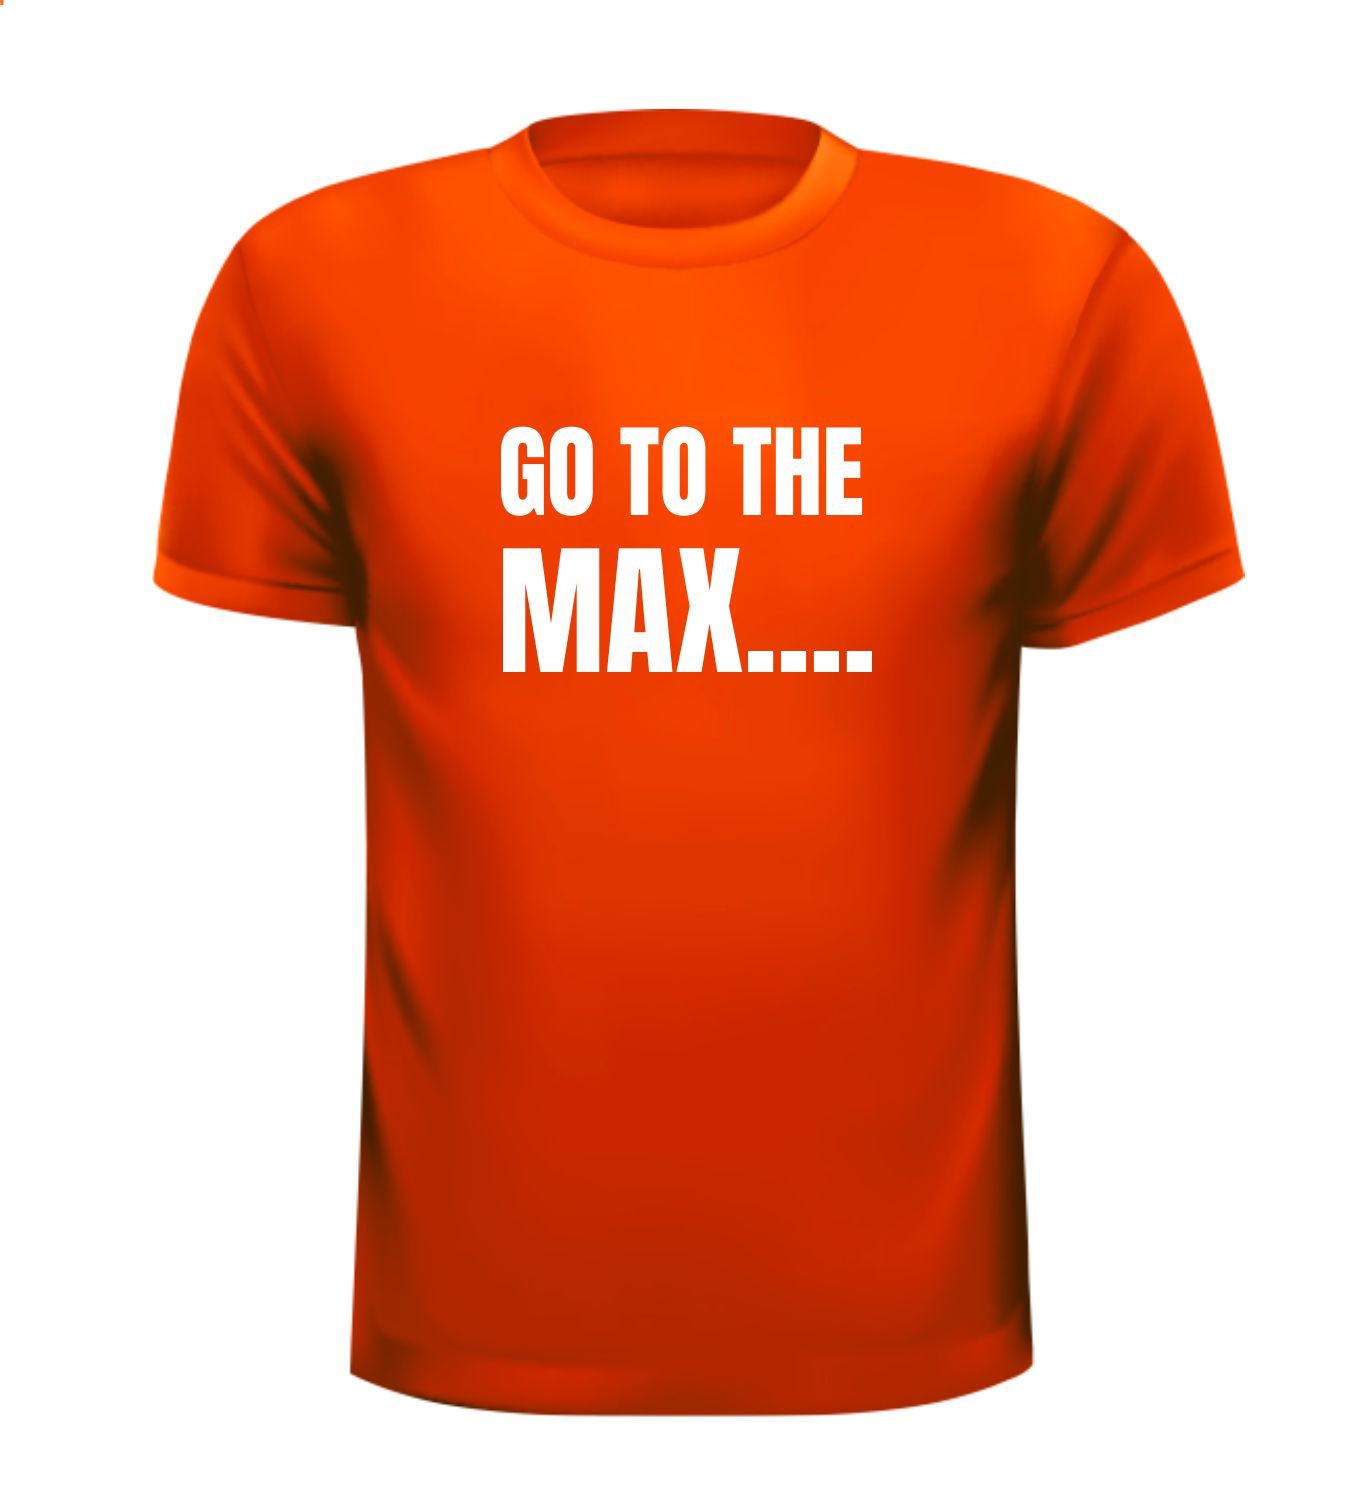 Koningsdag T-shirt go to the max!